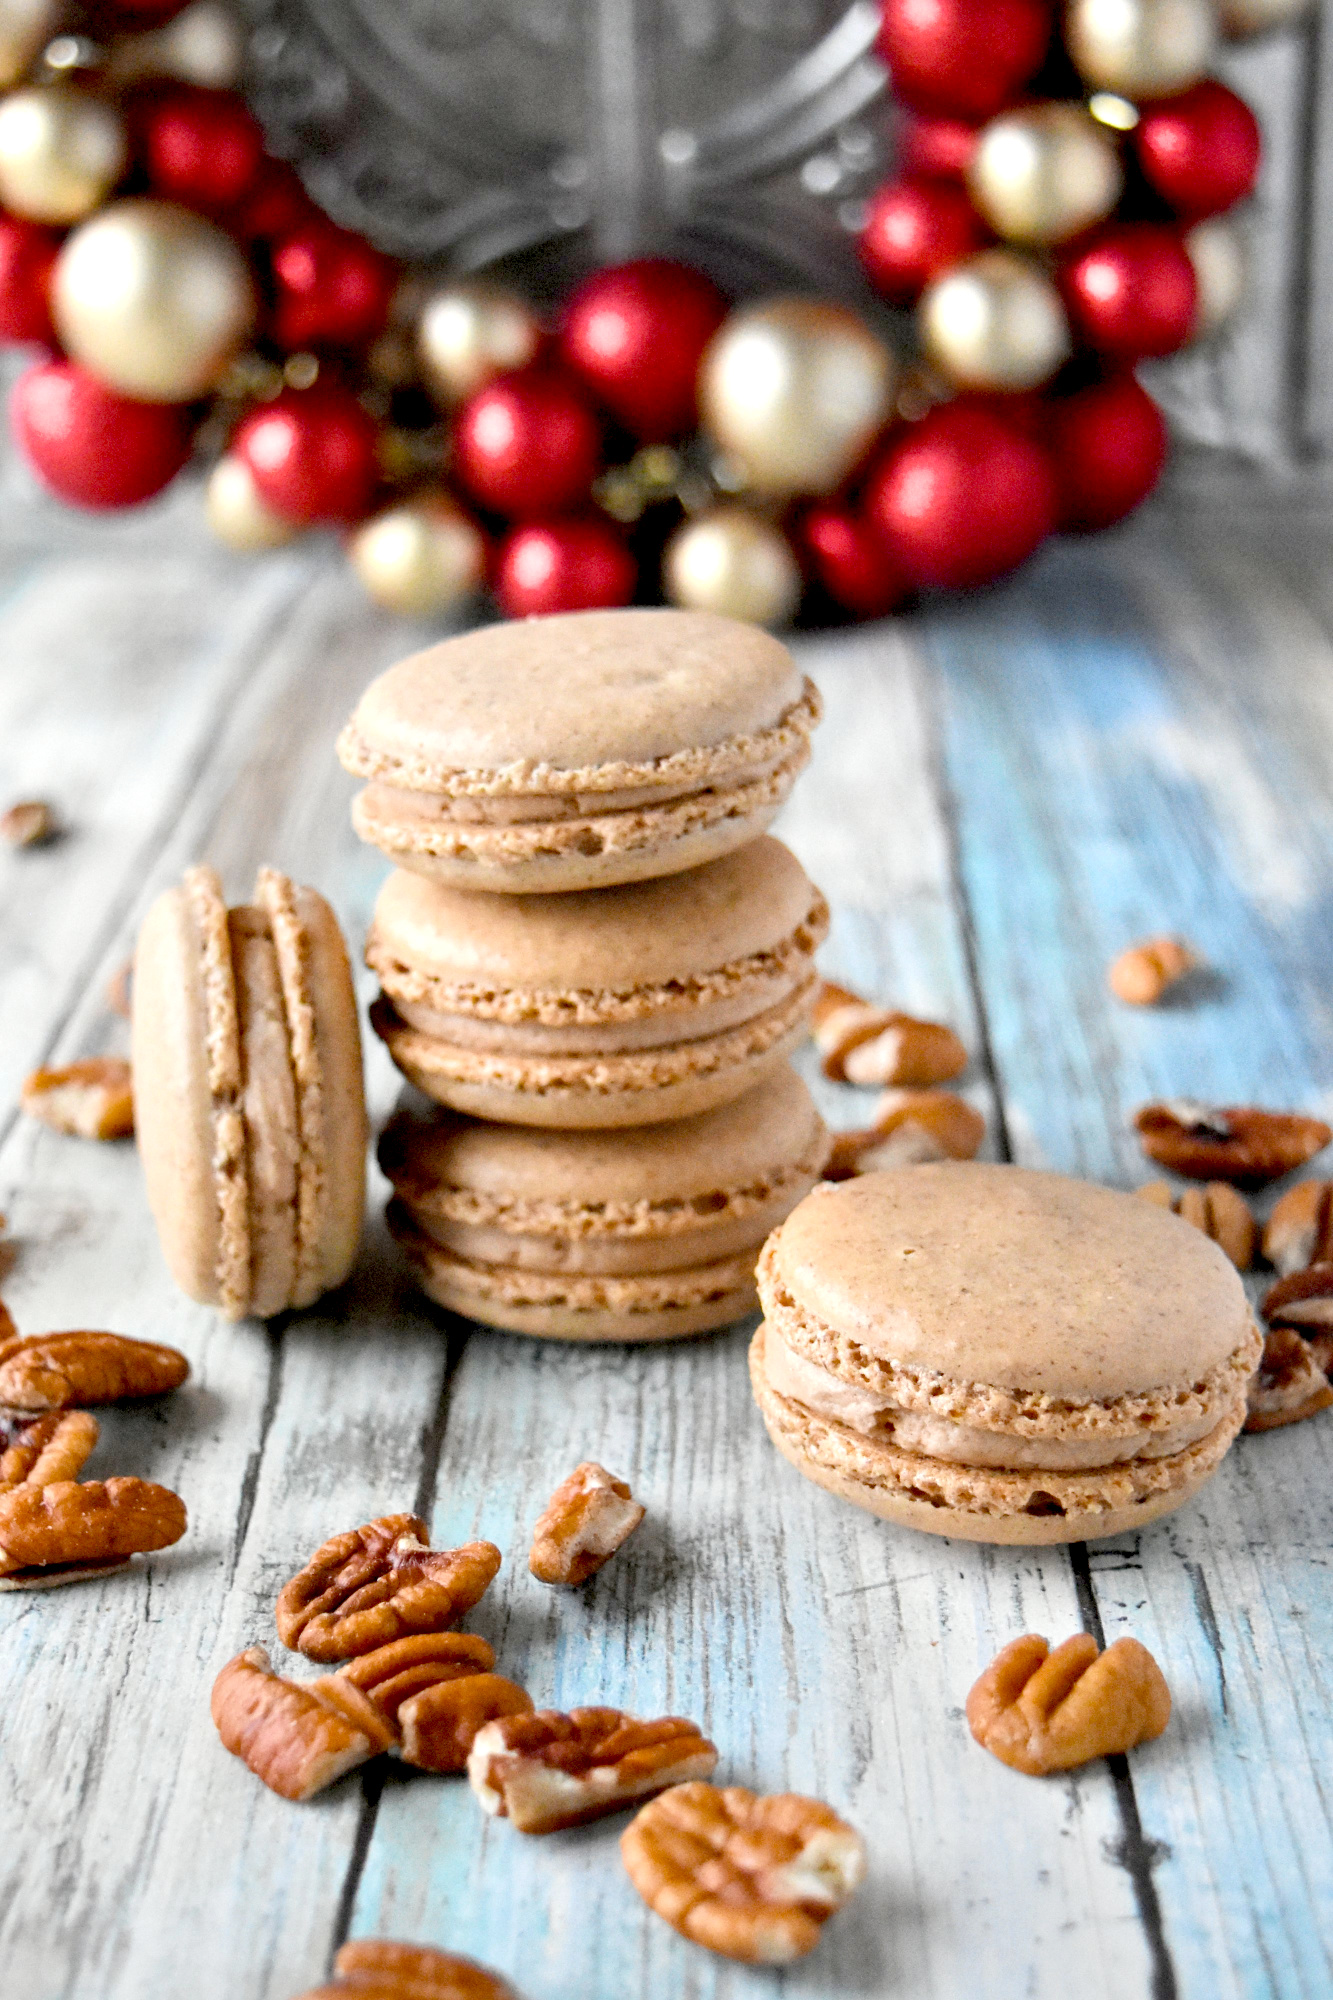 Cinnamon Pecan Macaron have the flavor of those fair cinnamon pecans in a macaron cookie.  They’re packed with pecan and cinnamon flavors with a hint of caramel in the filling. #ChristmasCookies